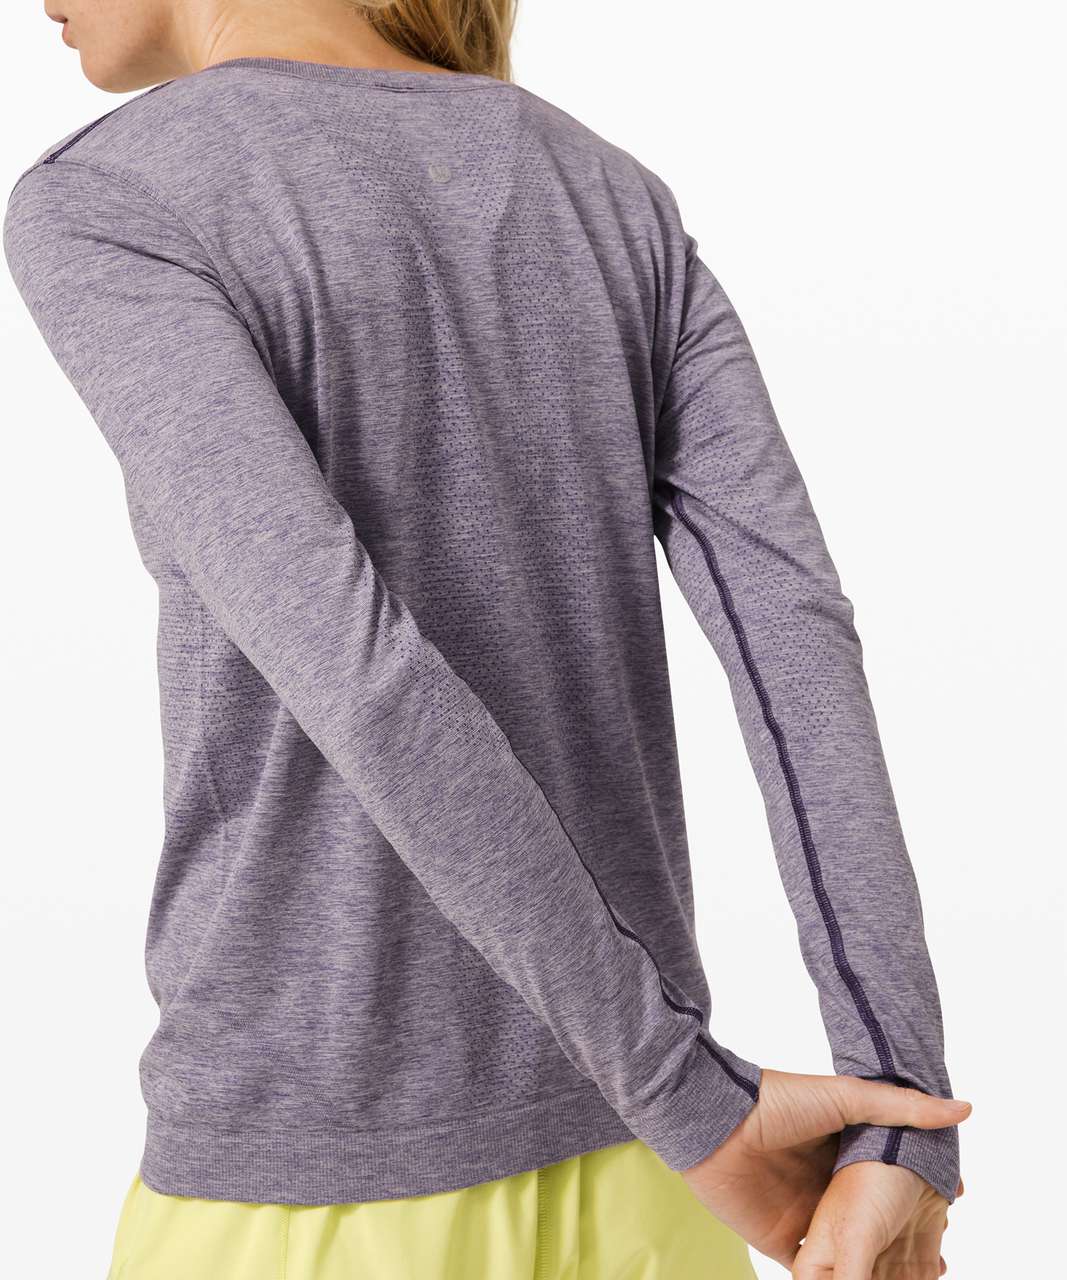 Lululemon Swiftly Relaxed Long Sleeve 2.0 - Midnight Orchid / Iced Iris